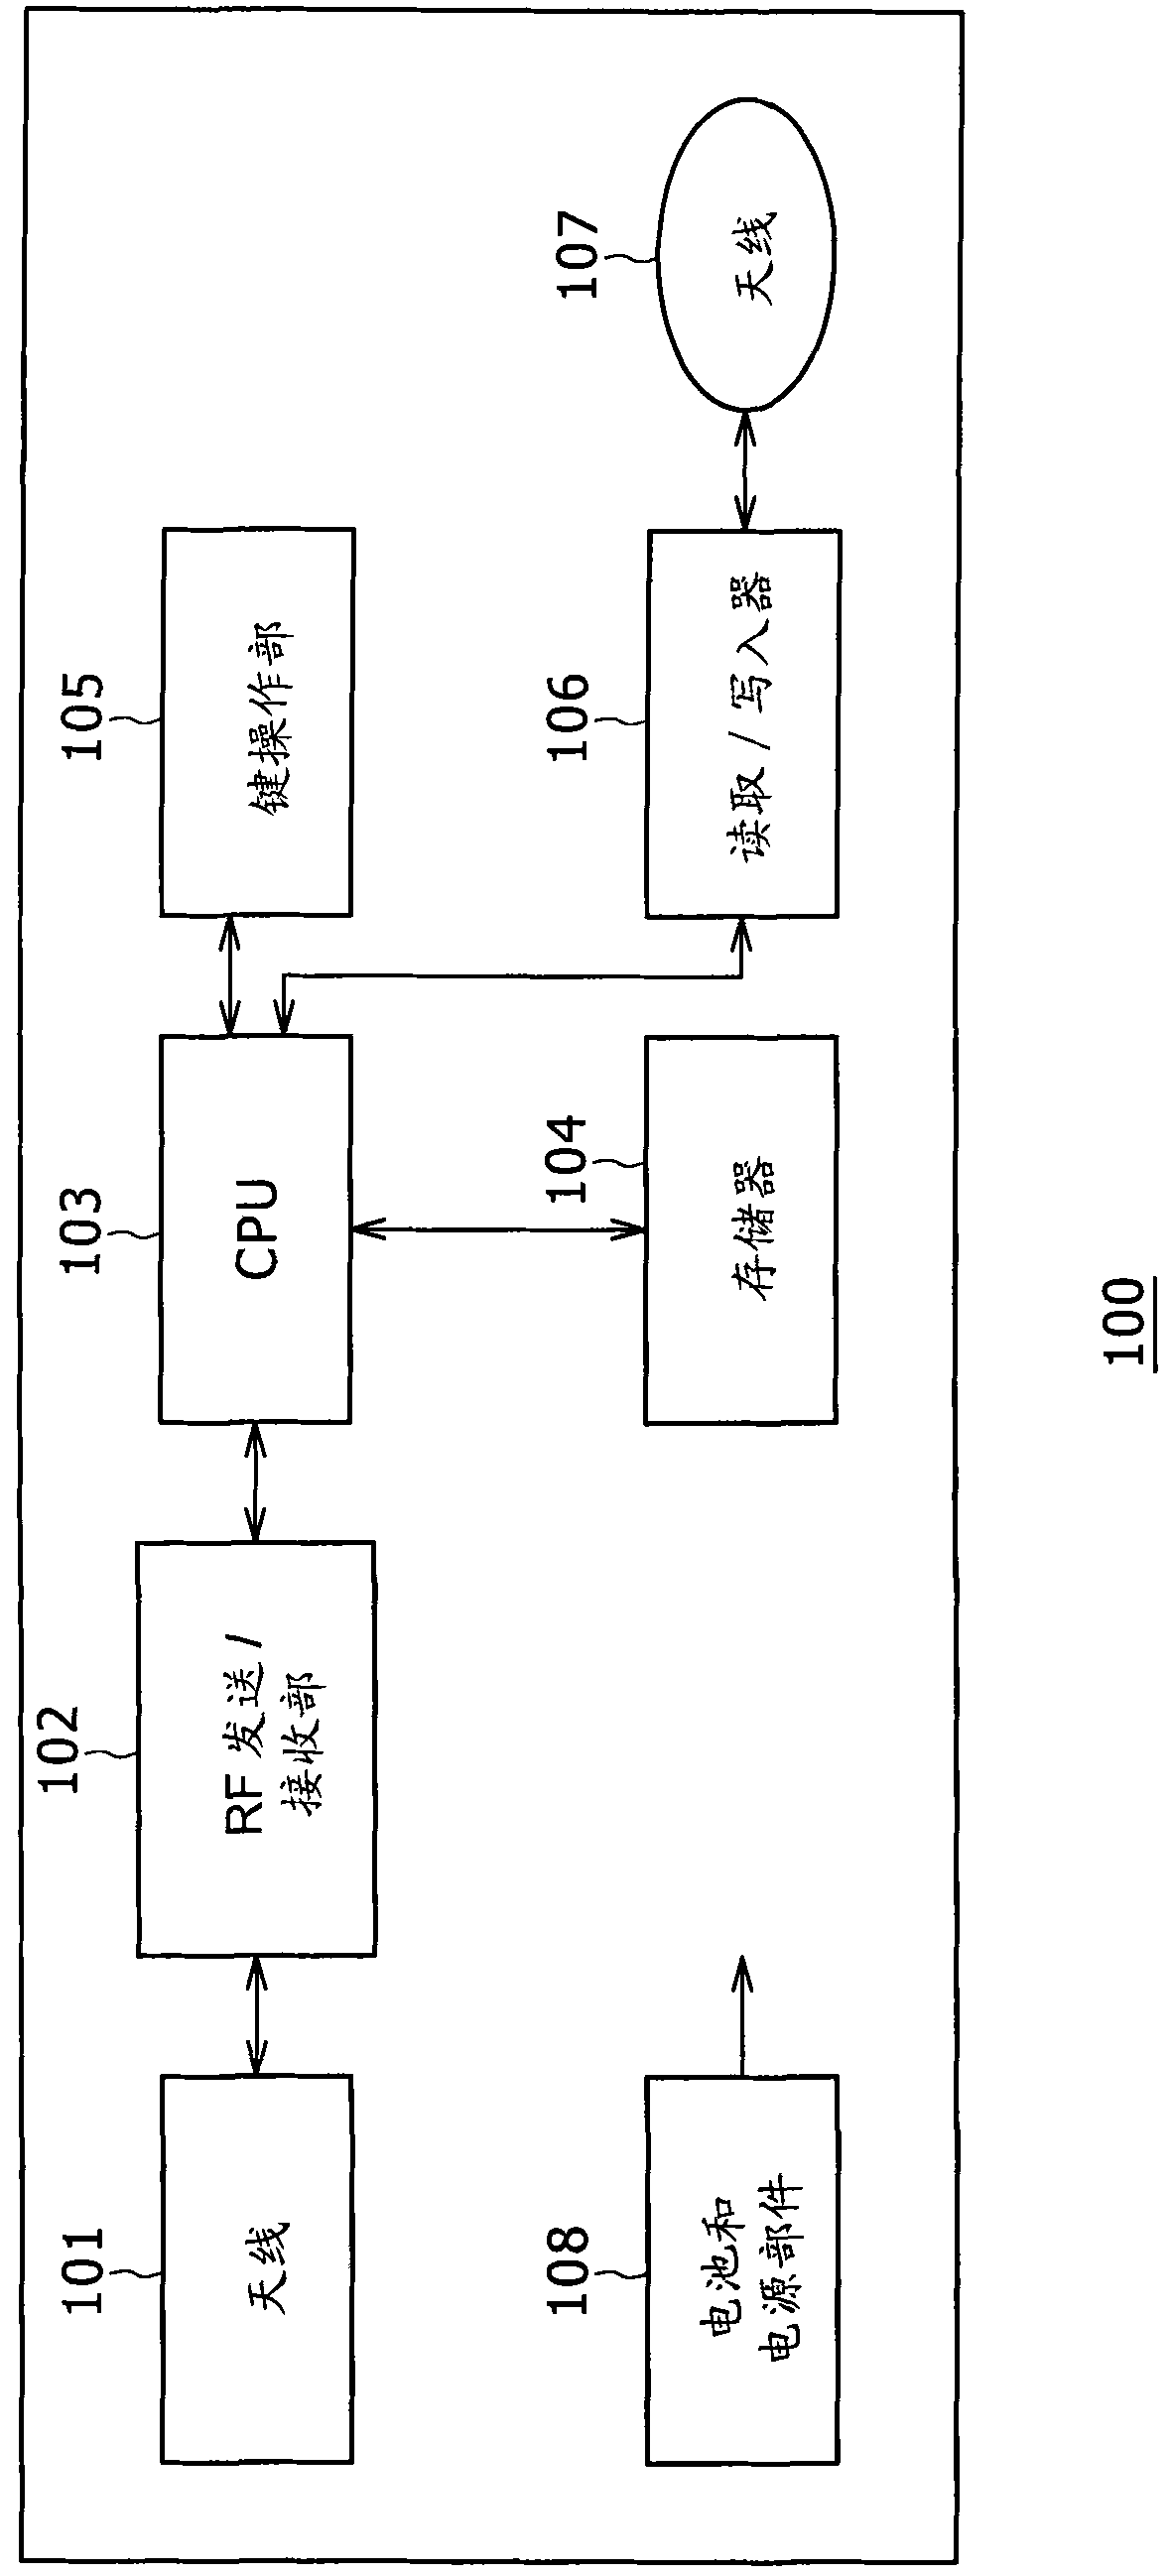 Remote control apparatus and communication system